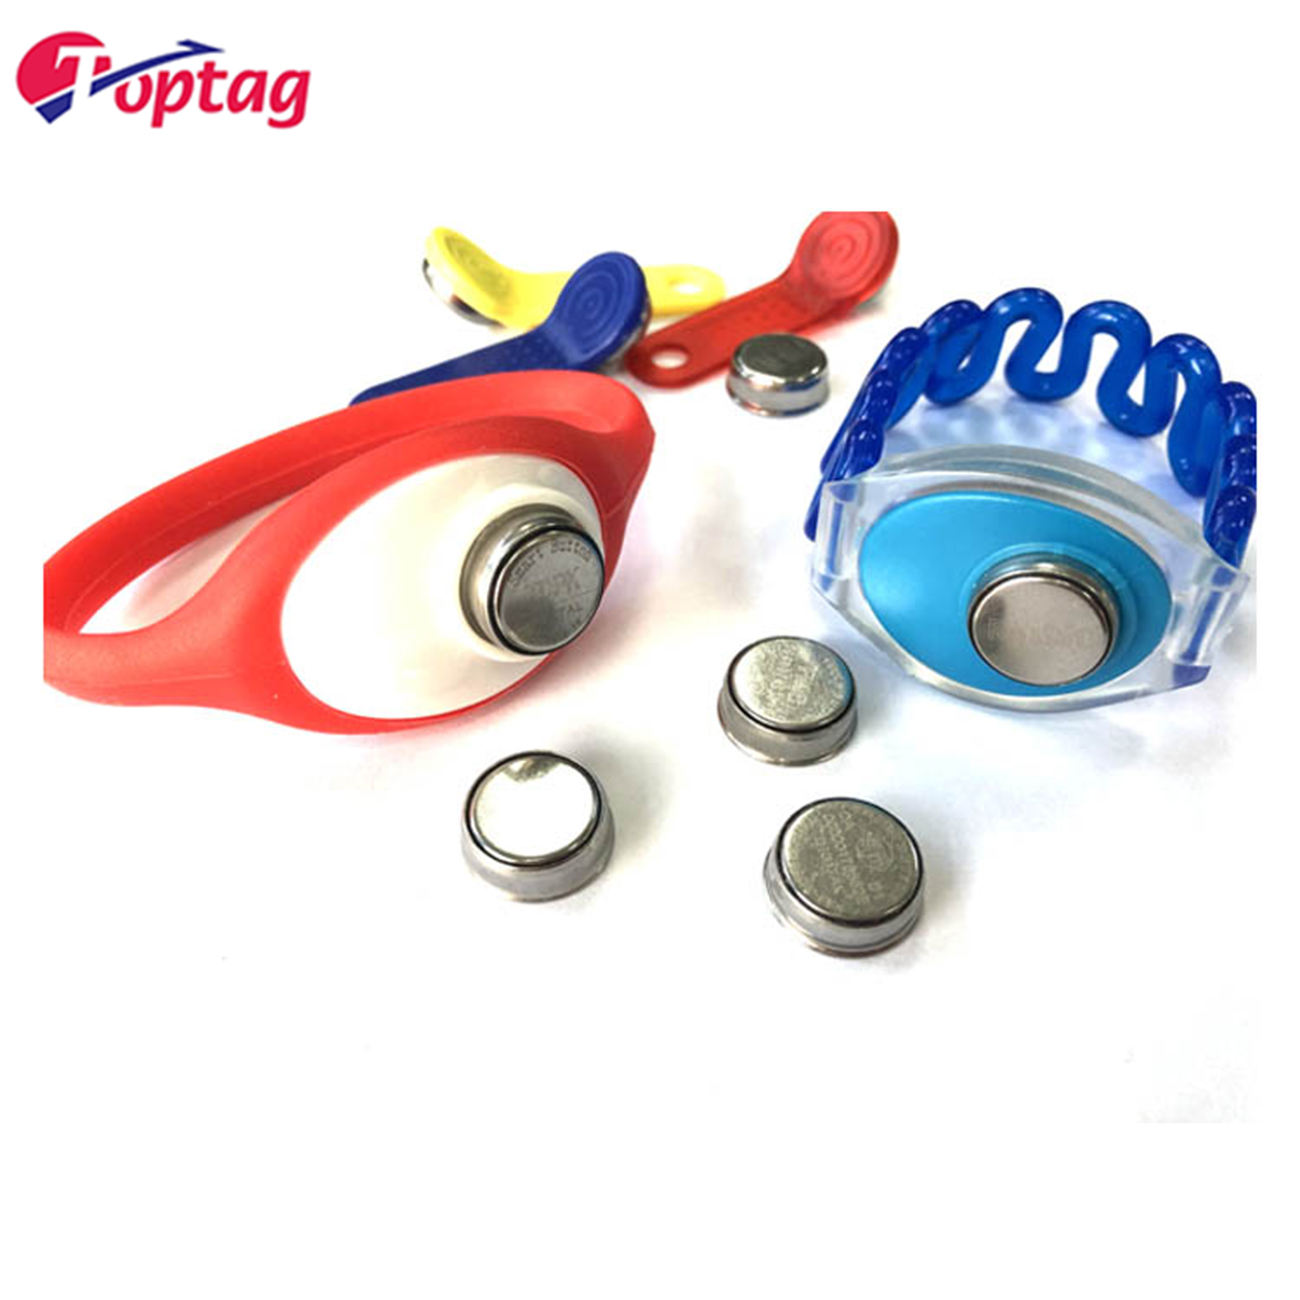 RFID TM Ibutton wristband bracelet TM Key with Leather/Plastic Holder for Access Control